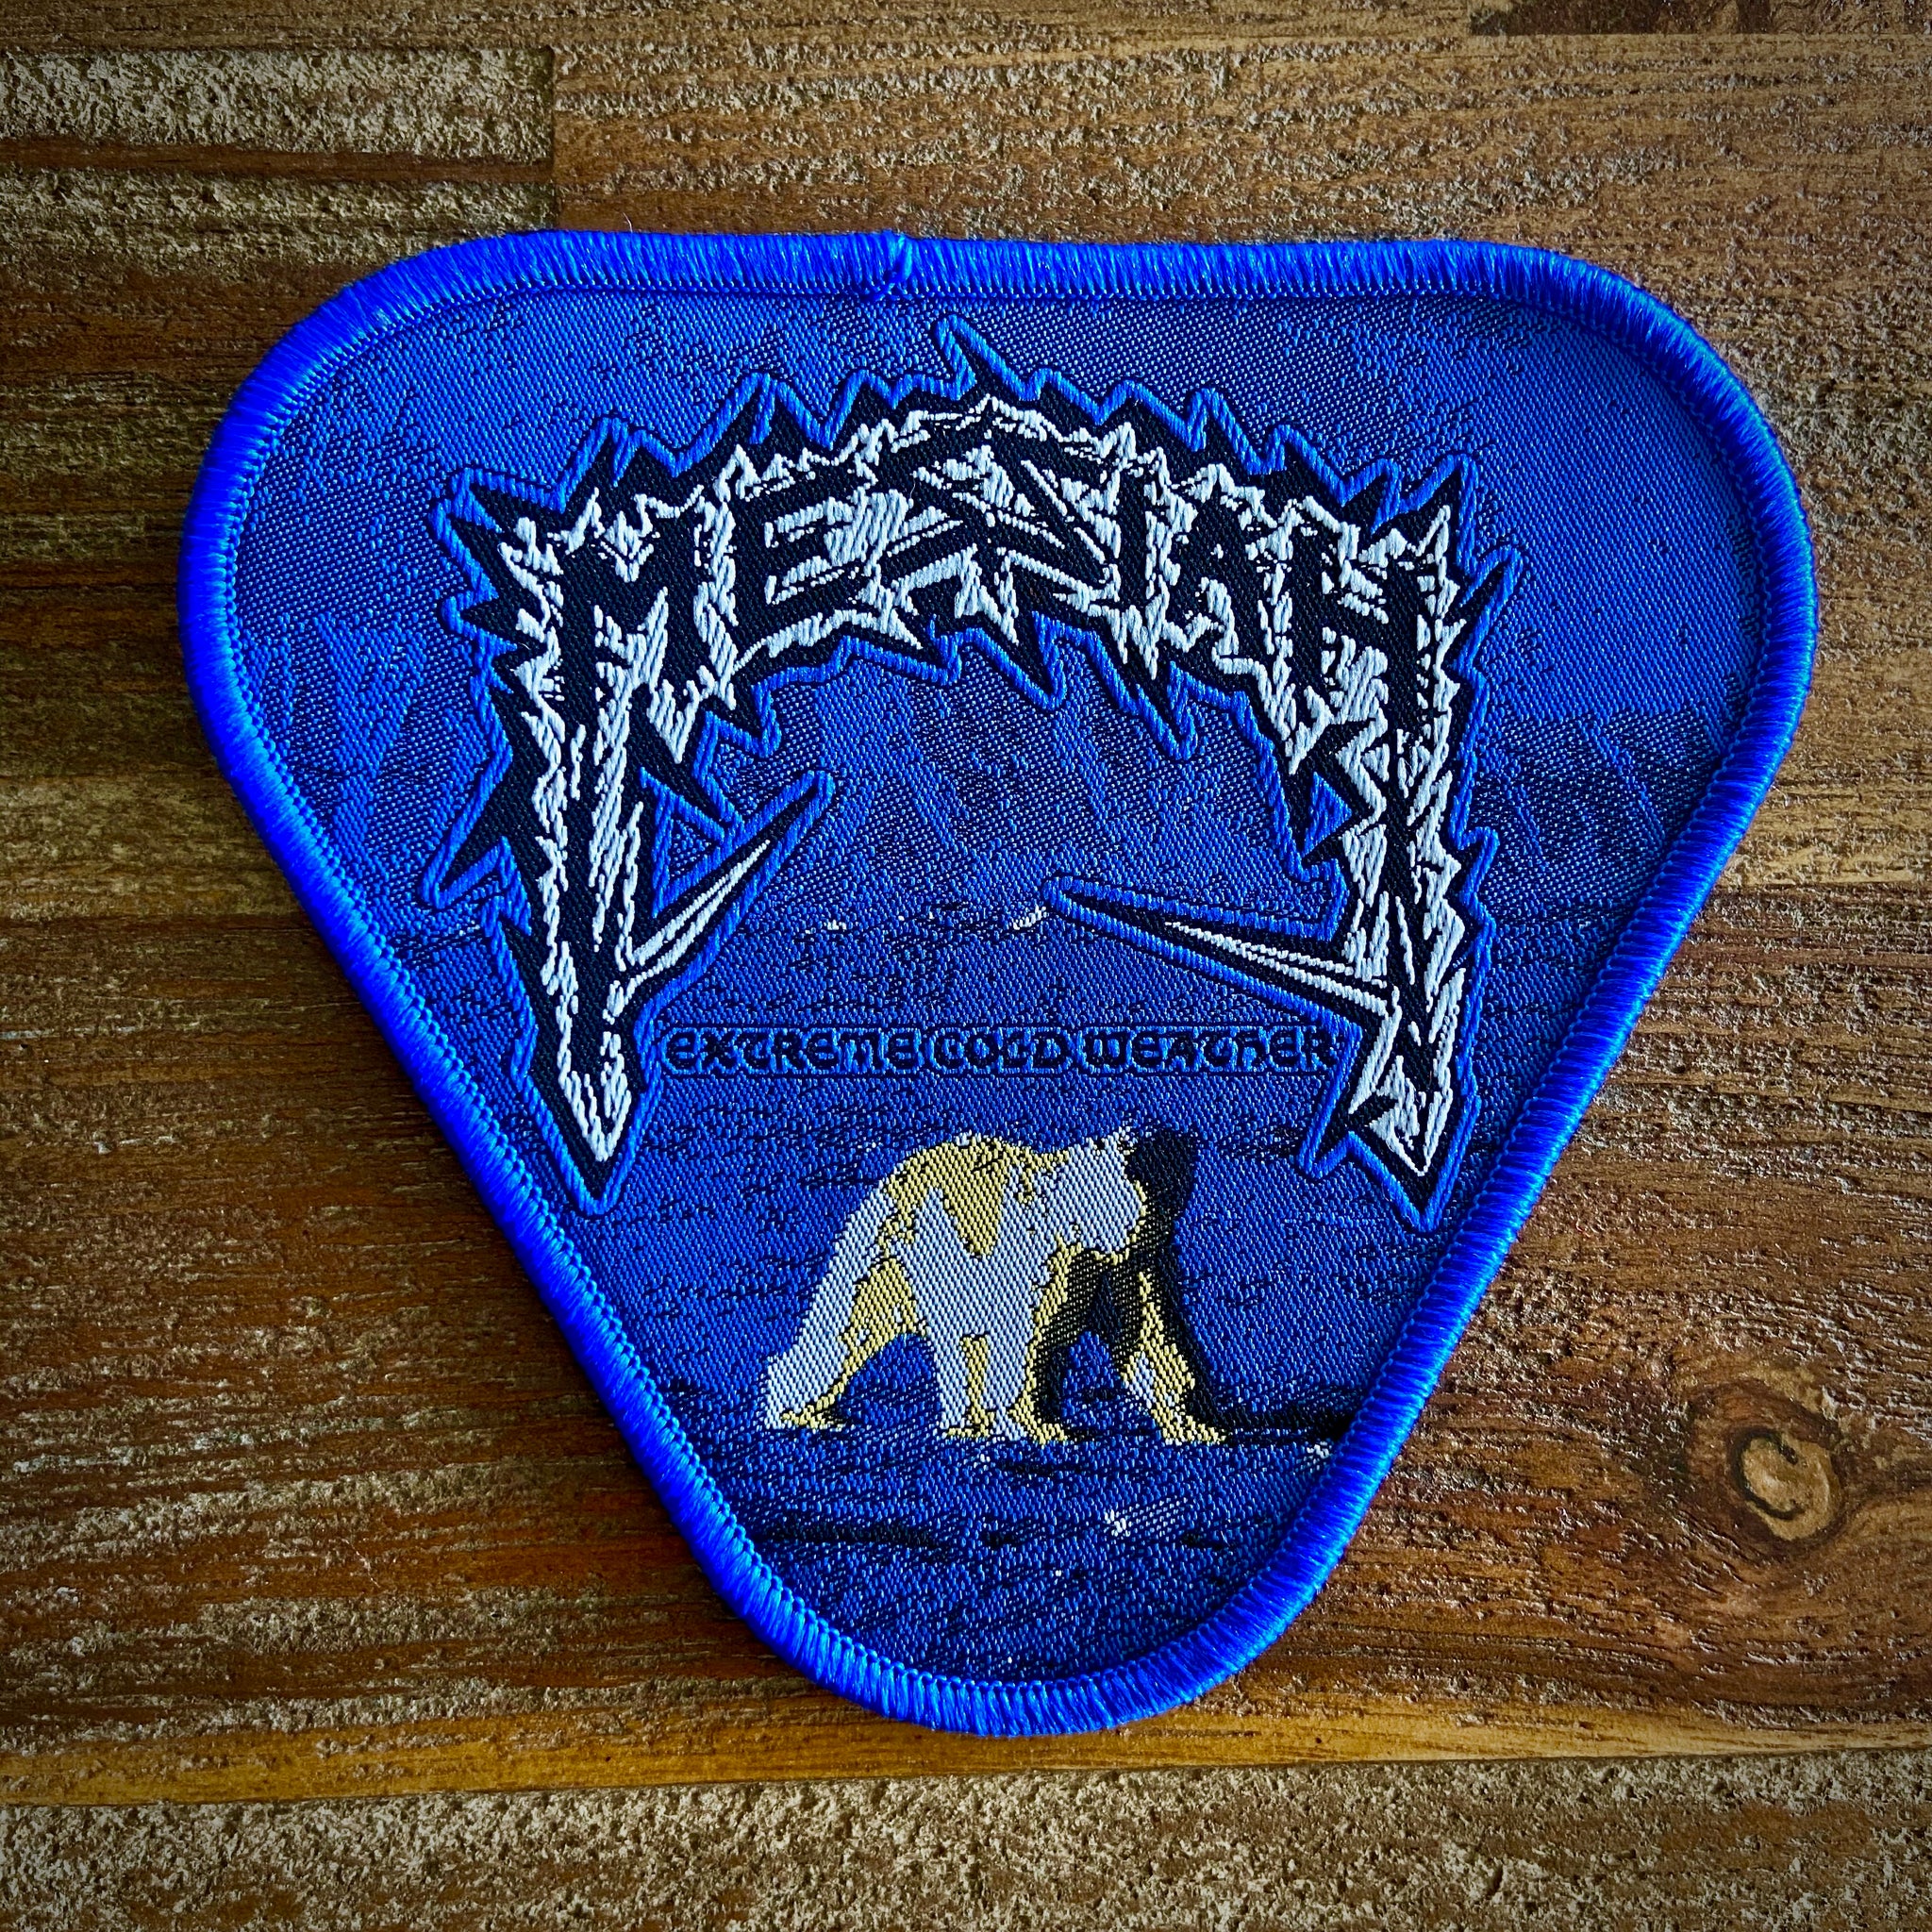 Messiah - Extreme Cold Weather – Pull The Plug Patches